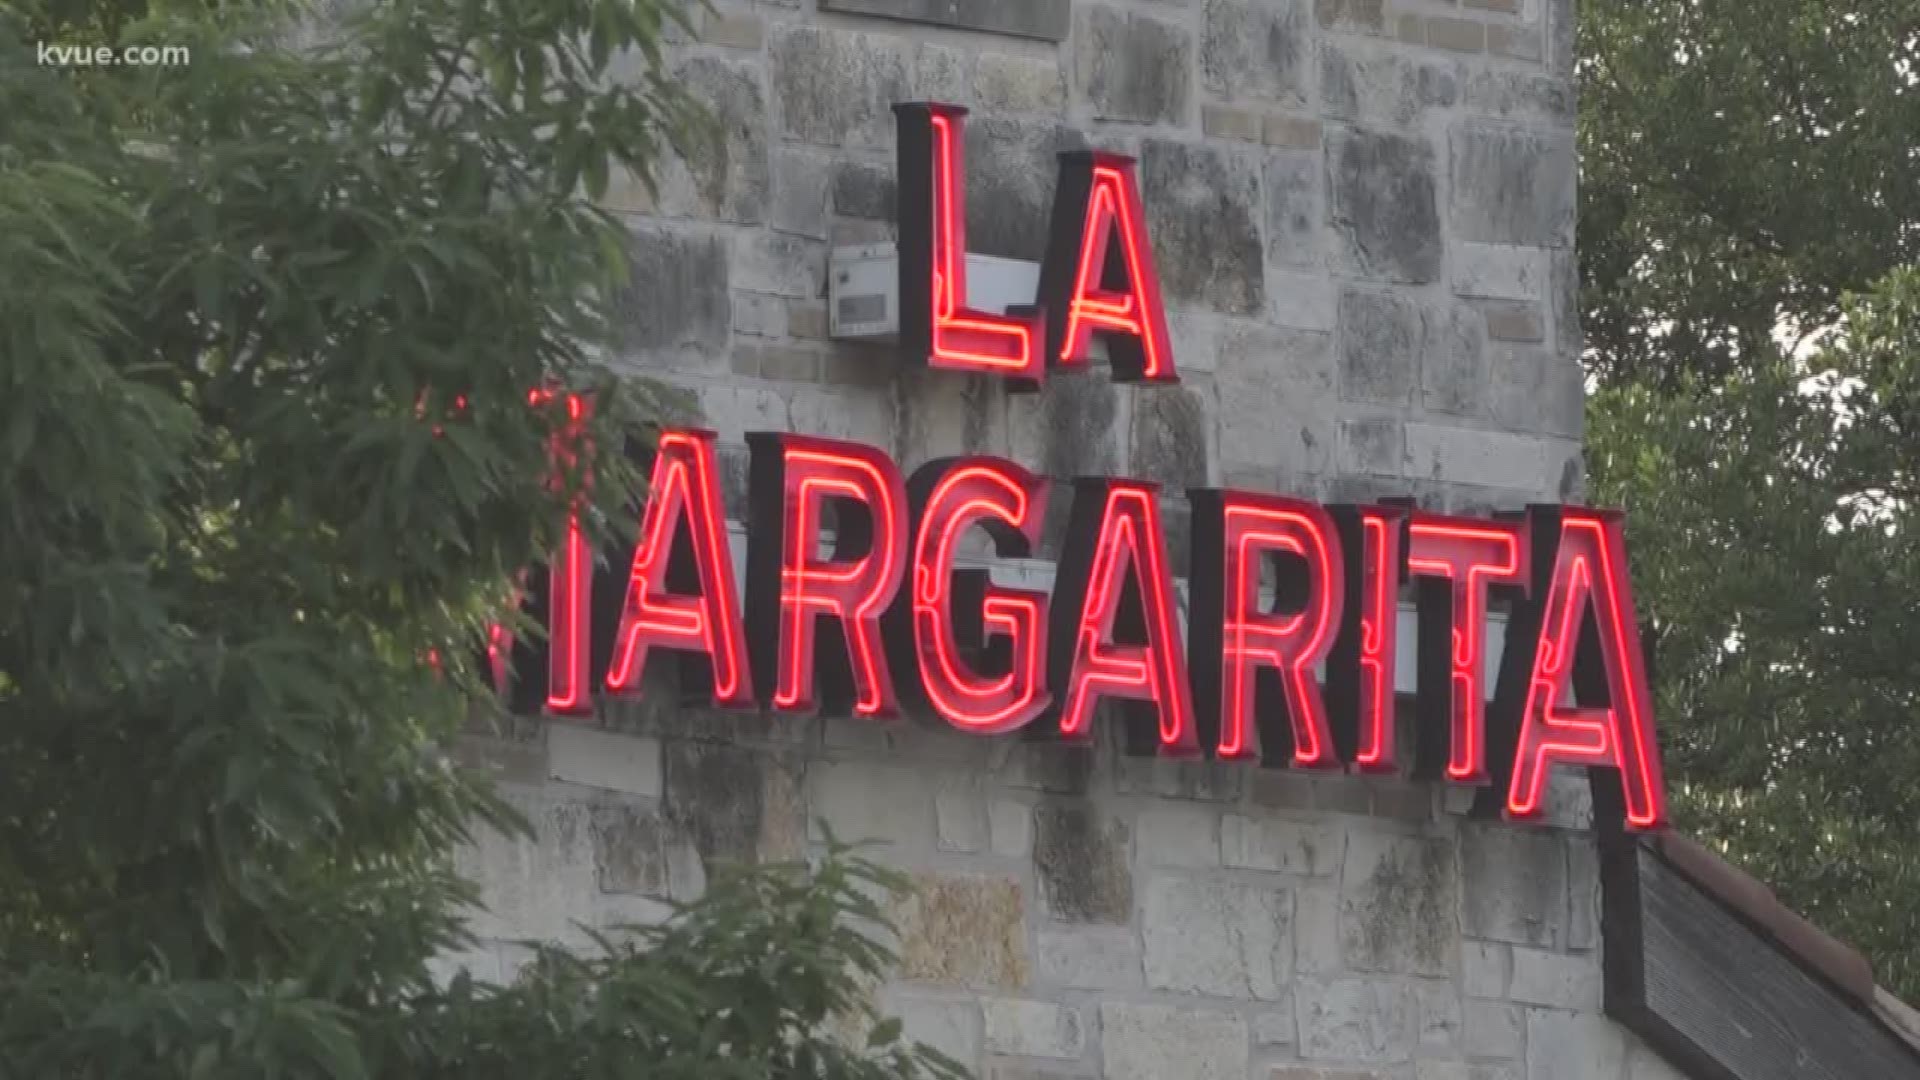 At least two people have come down with norovirus after eating catered food from La Margarita at a Round Rock High School baseball banquet. 110 have reported feeling sick.